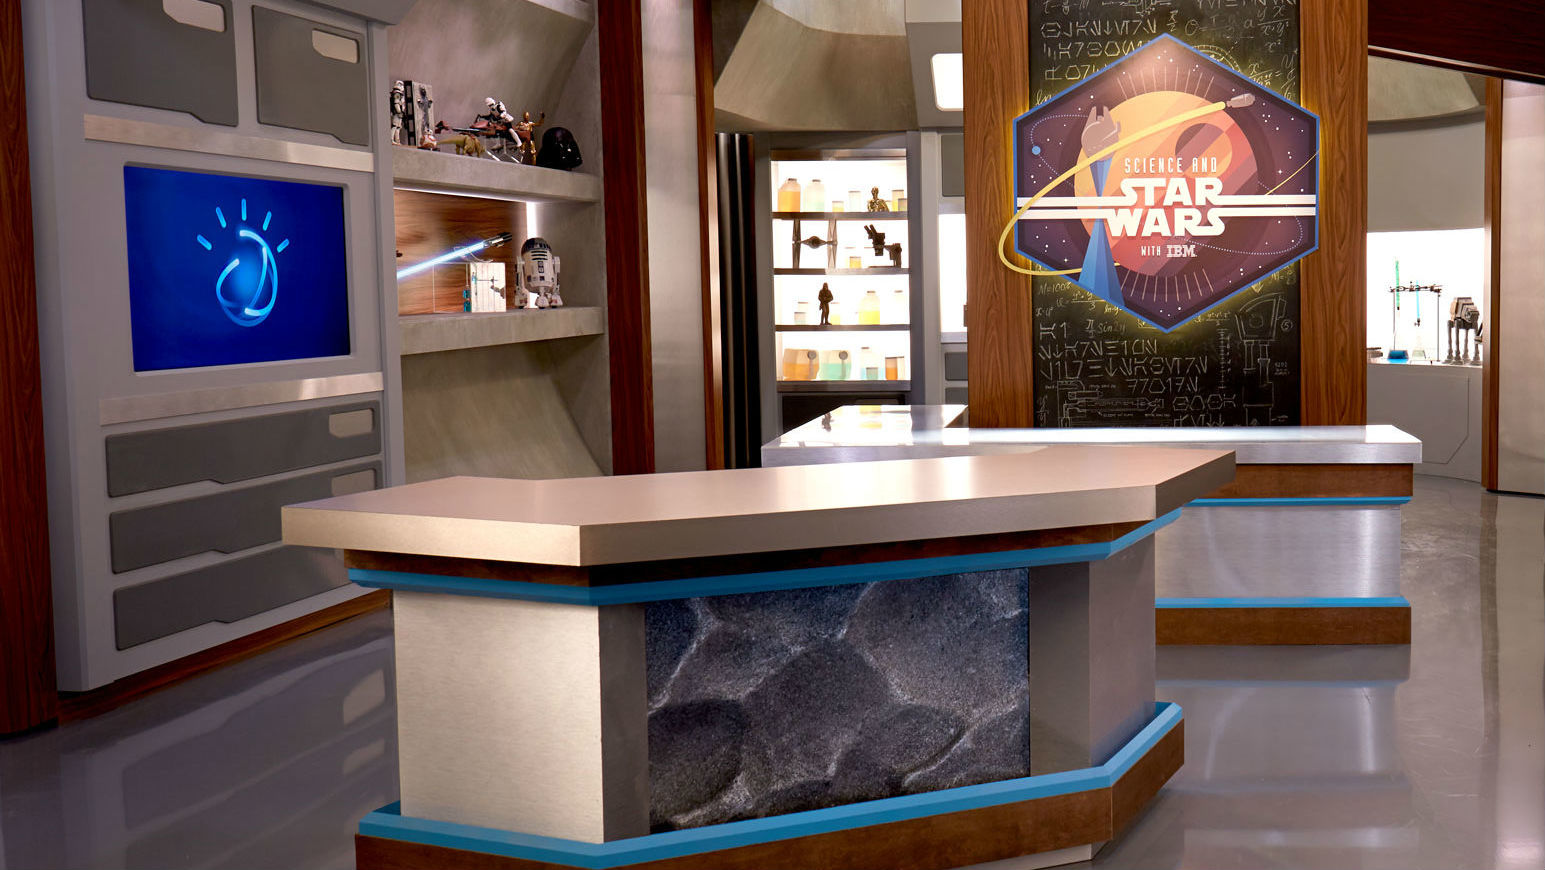 How Star Wars Is Expanding Its Online Presence With A New Science-Based Show